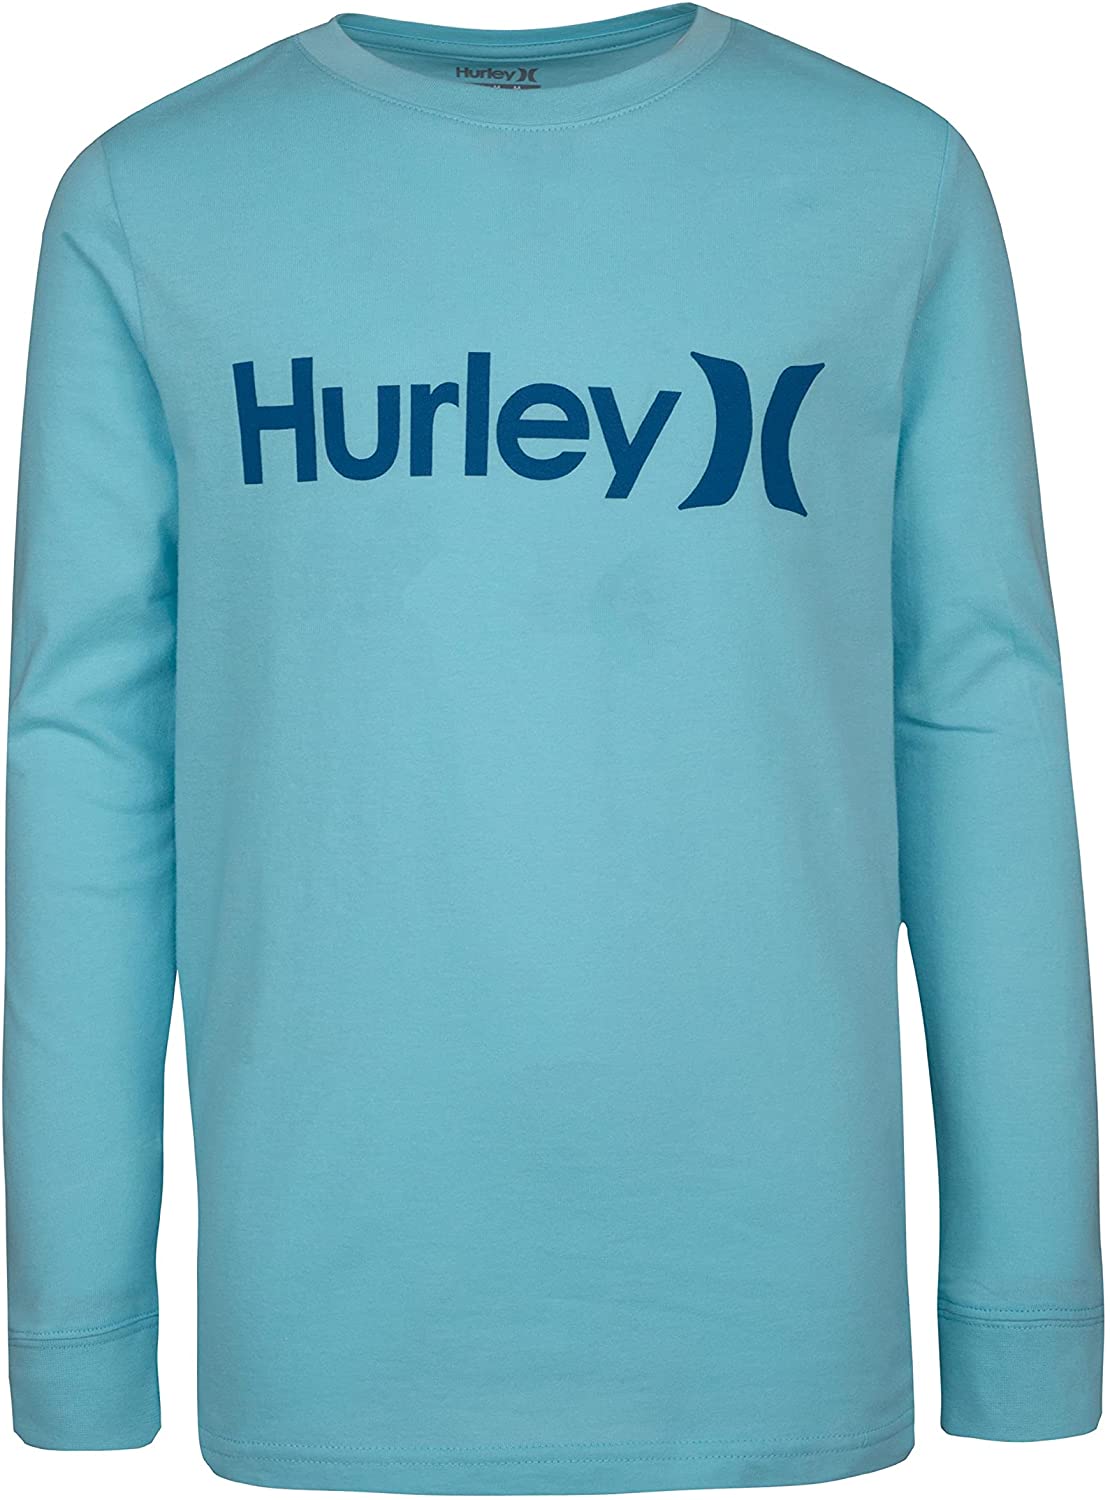 Details about   Boy's Youth Hurley Premium Tee Glow In the Dark Long Sleeve Shirt 